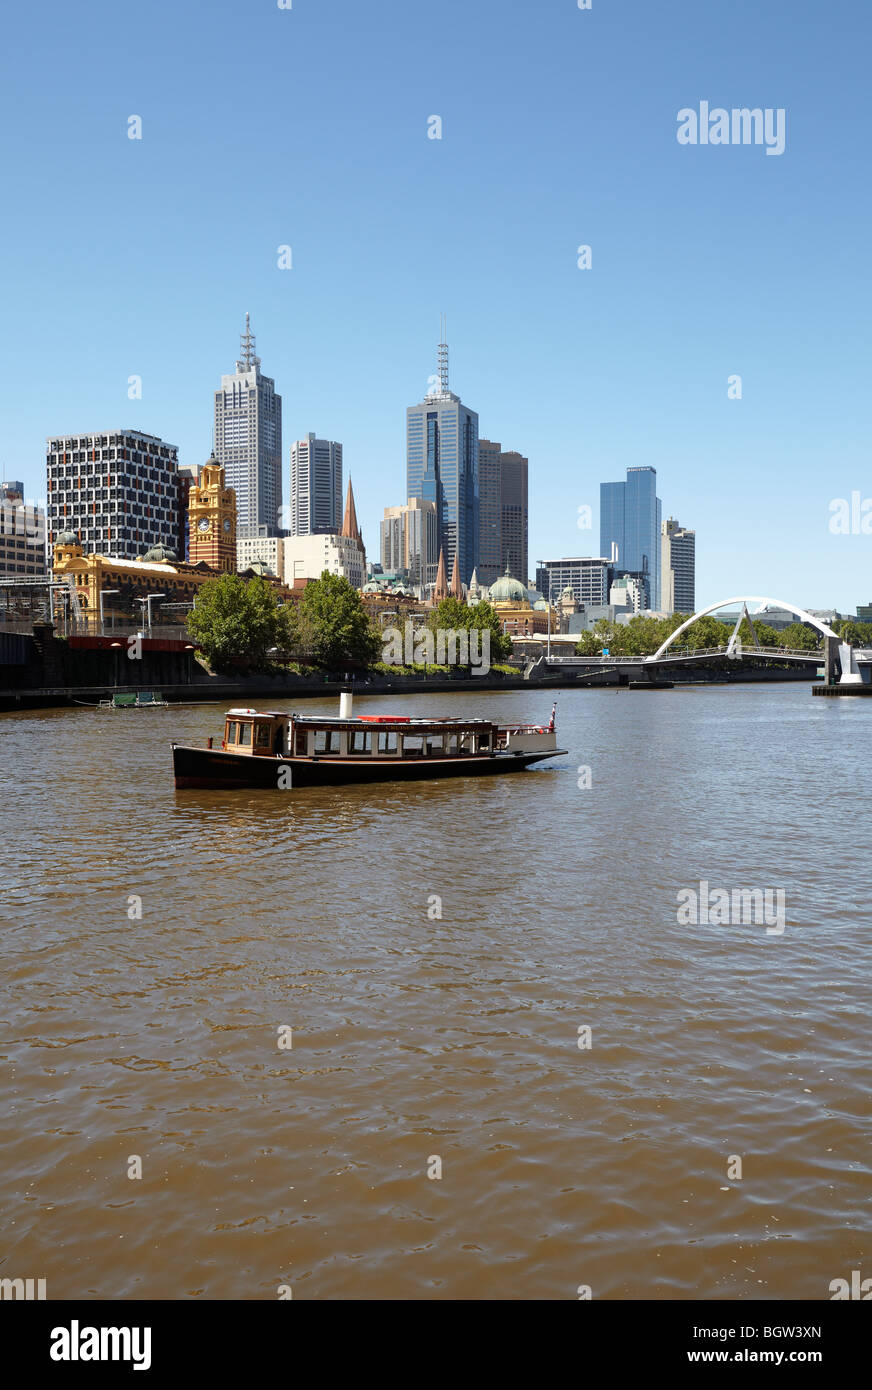 A river cruise boat on the Yarra river with a city view, Melbourne, Victoria, Australia Stock Photo